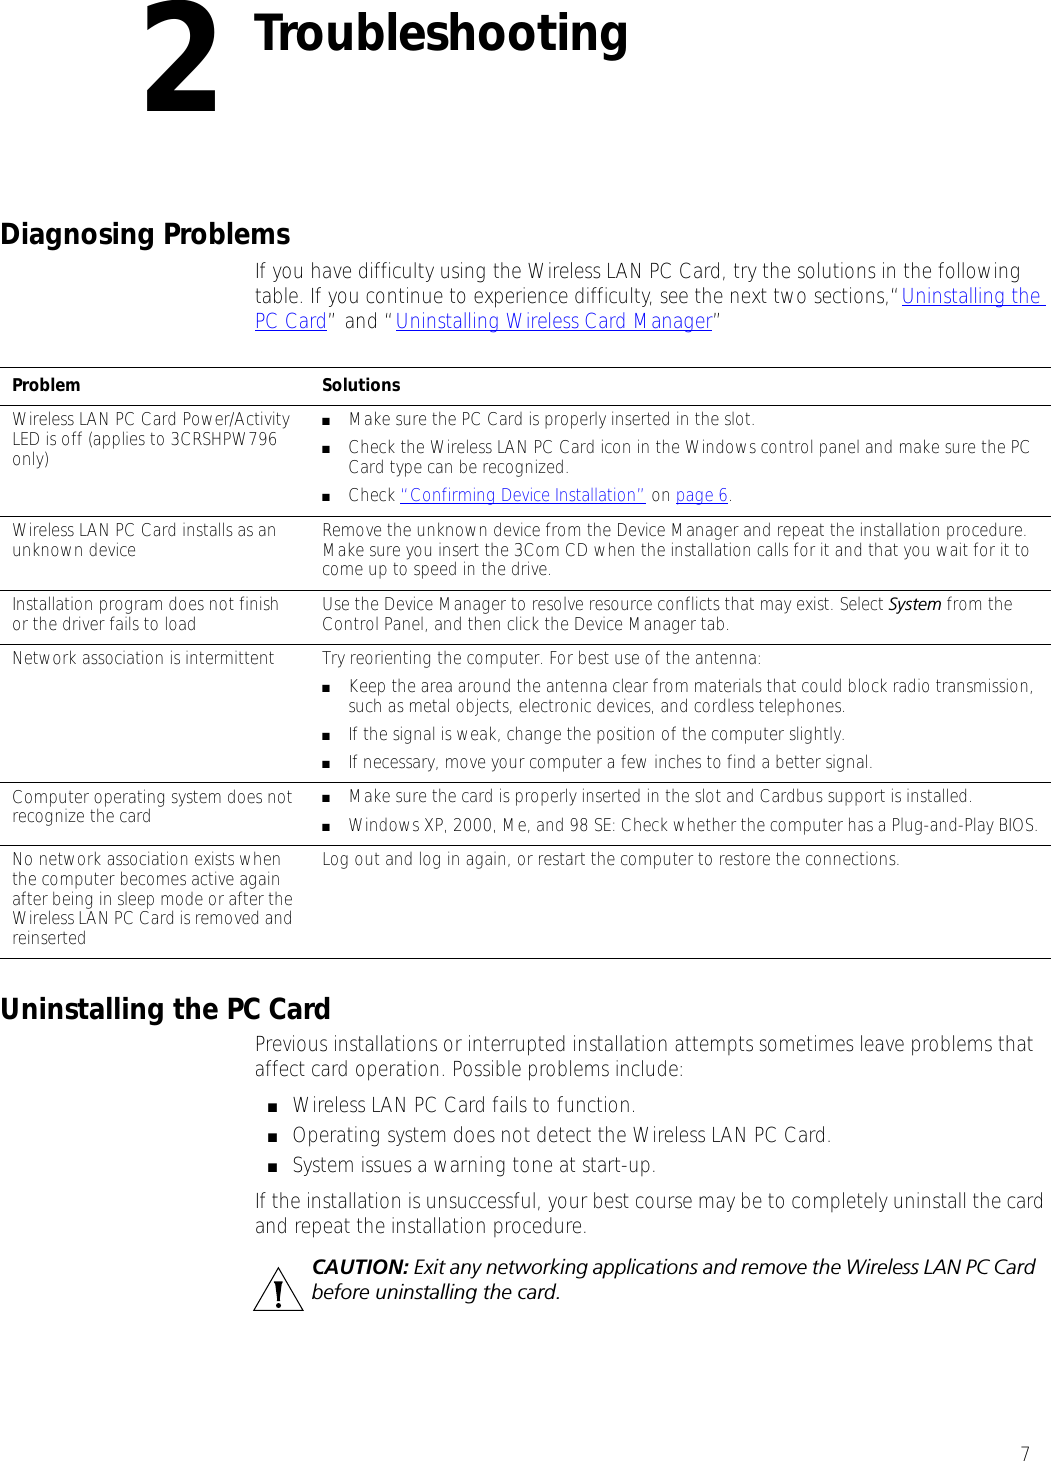 72TroubleshootingDiagnosing ProblemsIf you have difficulty using the Wireless LAN PC Card, try the solutions in the following table. If you continue to experience difficulty, see the next two sections,“Uninstalling the PC Card” and “Uninstalling Wireless Card Manager”Uninstalling the PC CardPrevious installations or interrupted installation attempts sometimes leave problems that affect card operation. Possible problems include:■Wireless LAN PC Card fails to function.■Operating system does not detect the Wireless LAN PC Card.■System issues a warning tone at start-up.If the installation is unsuccessful, your best course may be to completely uninstall the card and repeat the installation procedure.Problem SolutionsWireless LAN PC Card Power/Activity LED is off (applies to 3CRSHPW796 only)■Make sure the PC Card is properly inserted in the slot.■Check the Wireless LAN PC Card icon in the Windows control panel and make sure the PC Card type can be recognized.■Check “Confirming Device Installation” on page 6.Wireless LAN PC Card installs as an unknown device Remove the unknown device from the Device Manager and repeat the installation procedure. Make sure you insert the 3Com CD when the installation calls for it and that you wait for it to come up to speed in the drive. Installation program does not finish or the driver fails to load Use the Device Manager to resolve resource conflicts that may exist. Select System from the Control Panel, and then click the Device Manager tab.Network association is intermittent  Try reorienting the computer. For best use of the antenna:■Keep the area around the antenna clear from materials that could block radio transmission, such as metal objects, electronic devices, and cordless telephones.■If the signal is weak, change the position of the computer slightly.■If necessary, move your computer a few inches to find a better signal. Computer operating system does not recognize the card ■Make sure the card is properly inserted in the slot and Cardbus support is installed.■Windows XP, 2000, Me, and 98 SE: Check whether the computer has a Plug-and-Play BIOS.No network association exists when the computer becomes active again after being in sleep mode or after the Wireless LAN PC Card is removed and reinserted Log out and log in again, or restart the computer to restore the connections.CAUTION: Exit any networking applications and remove the Wireless LAN PC Card before uninstalling the card.